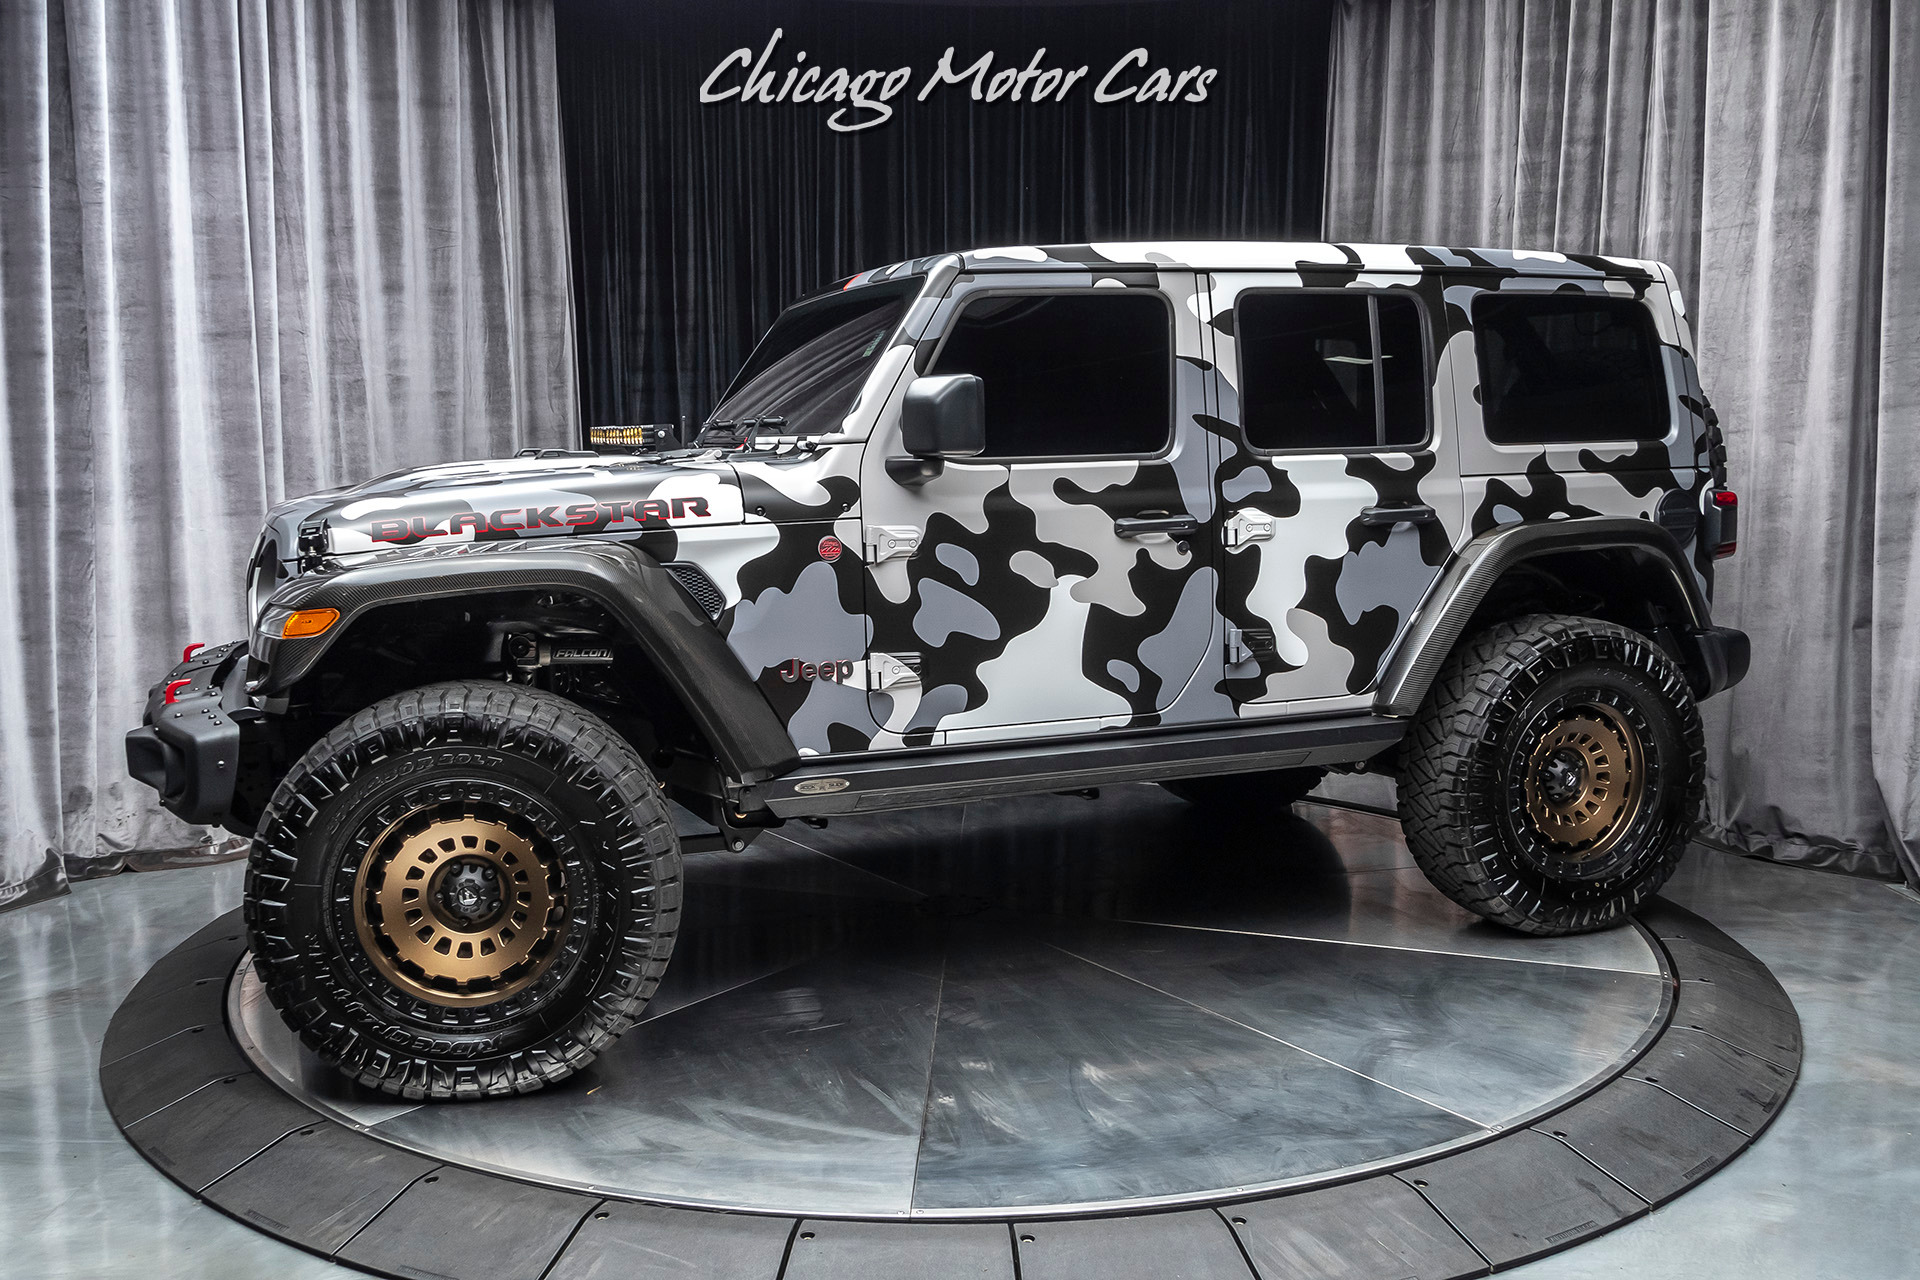 Used 2020 Jeep Wrangler Unlimited Rubicon! Supercharged! Only 9,618 Miles!  Over $40k+ In Upgrades! For Sale (Special Pricing) | Chicago Motor Cars  Stock #18912